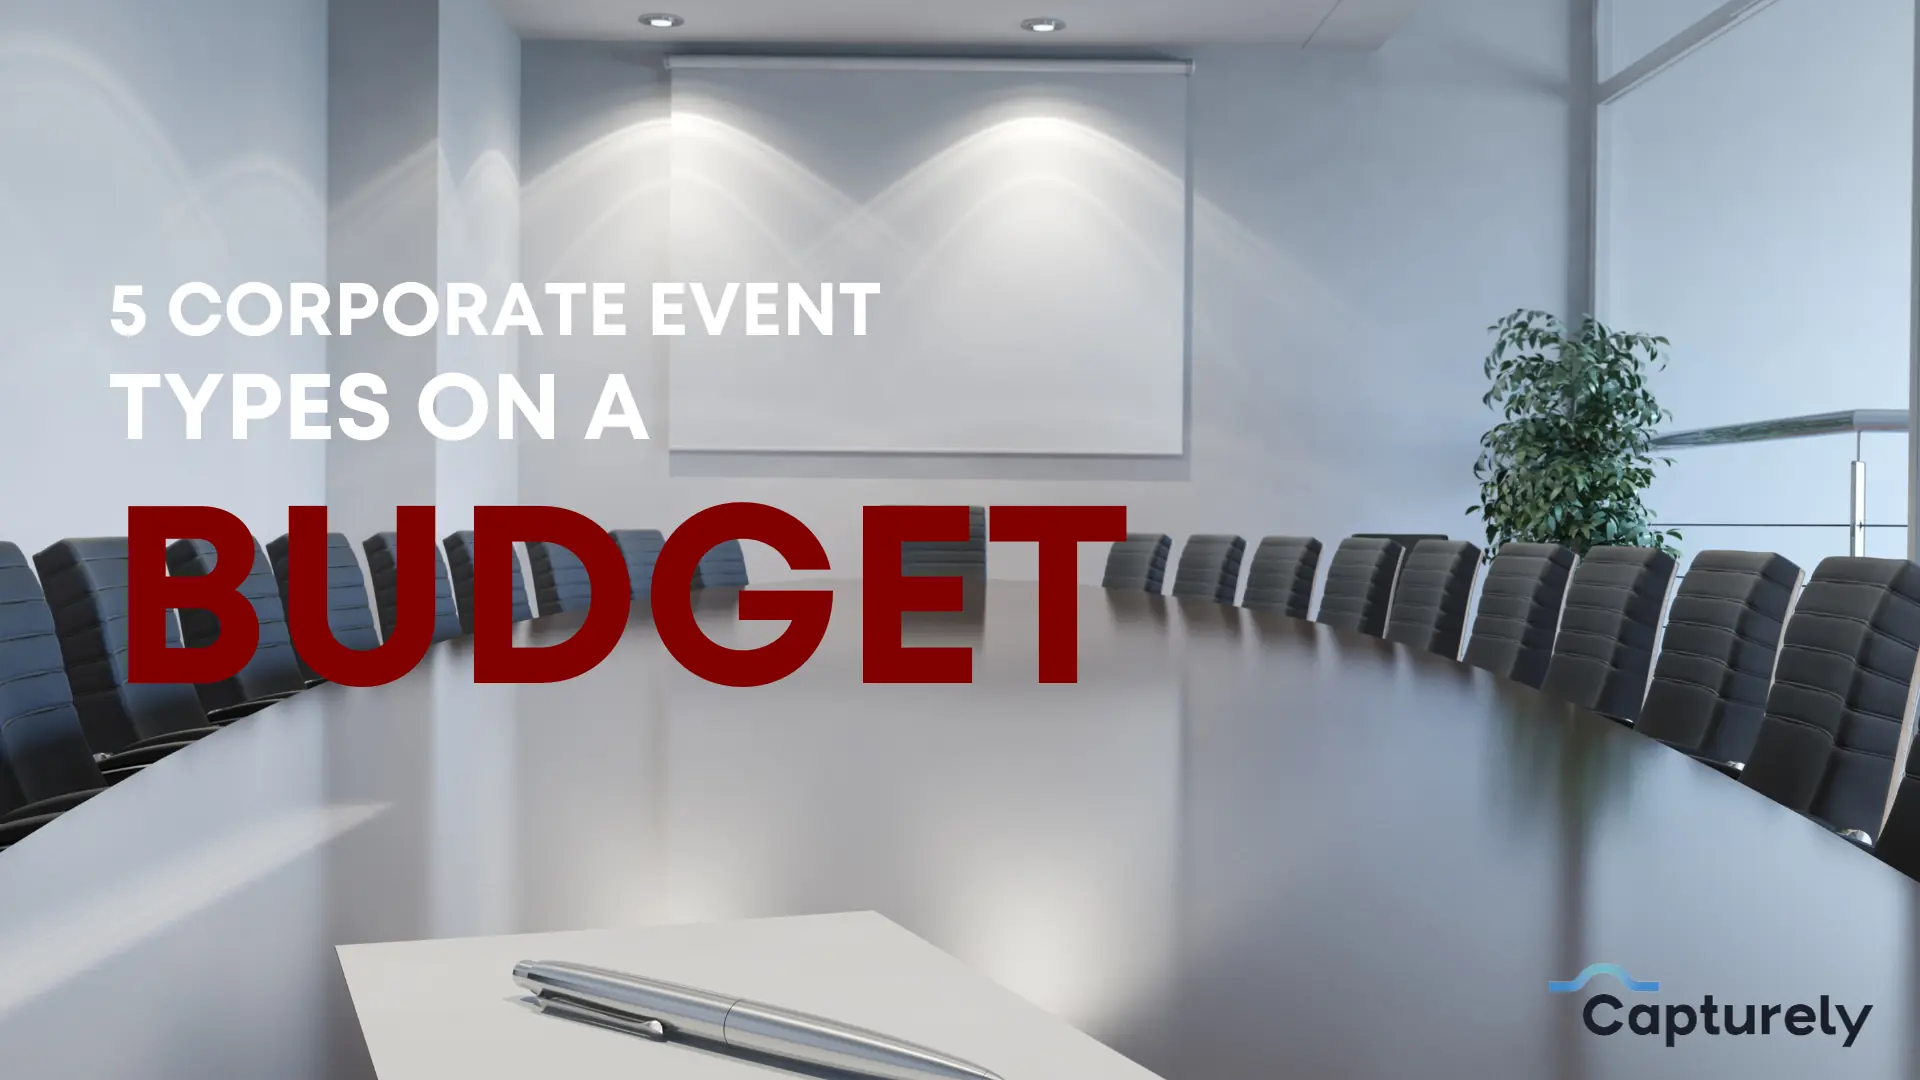 5 Corporate Event Types on a Budget